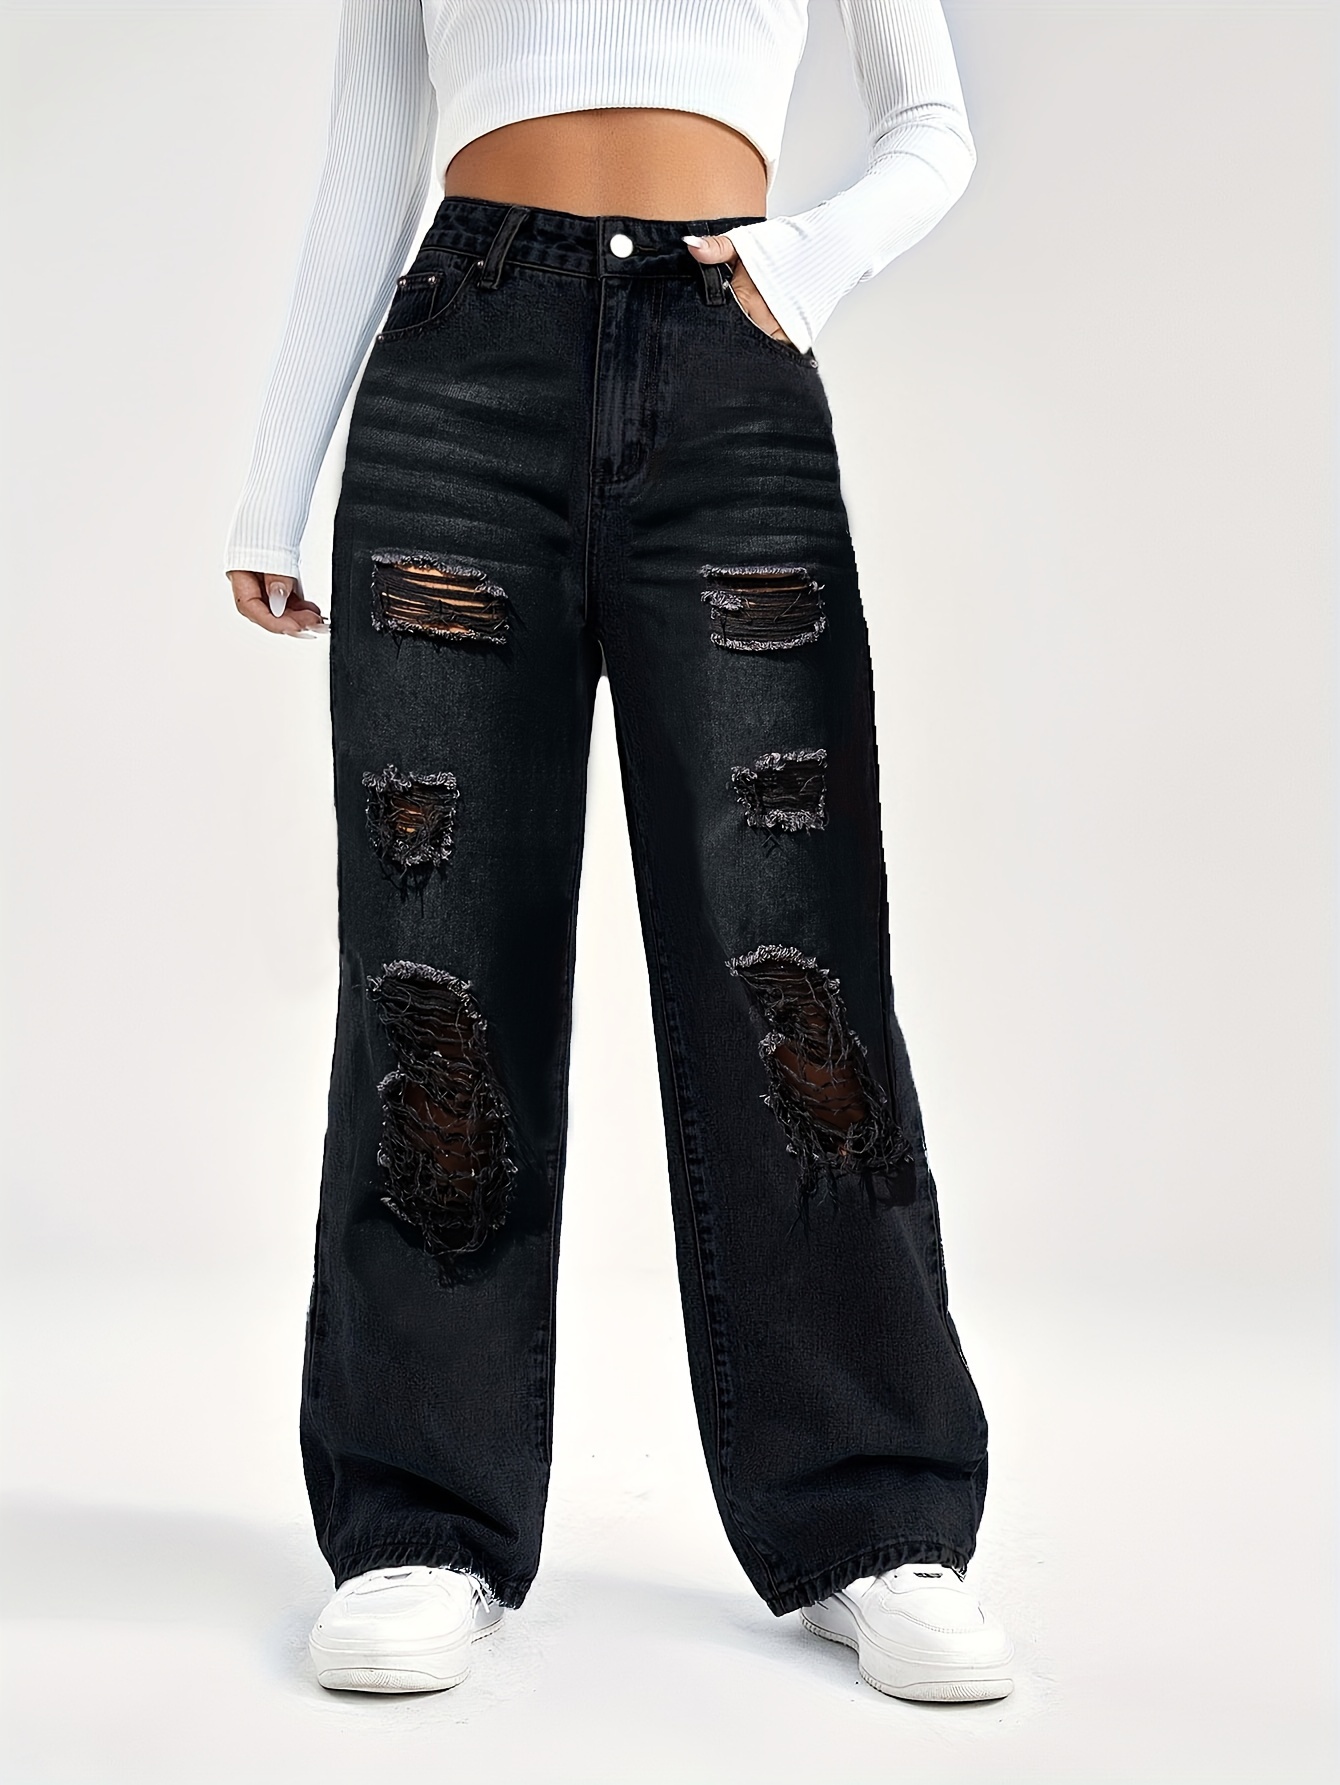 Posijego Womens Wide Legs Jeans Ripped High Waisted Pull On Denim Pants  Baggy Straight Jeans with Pockets